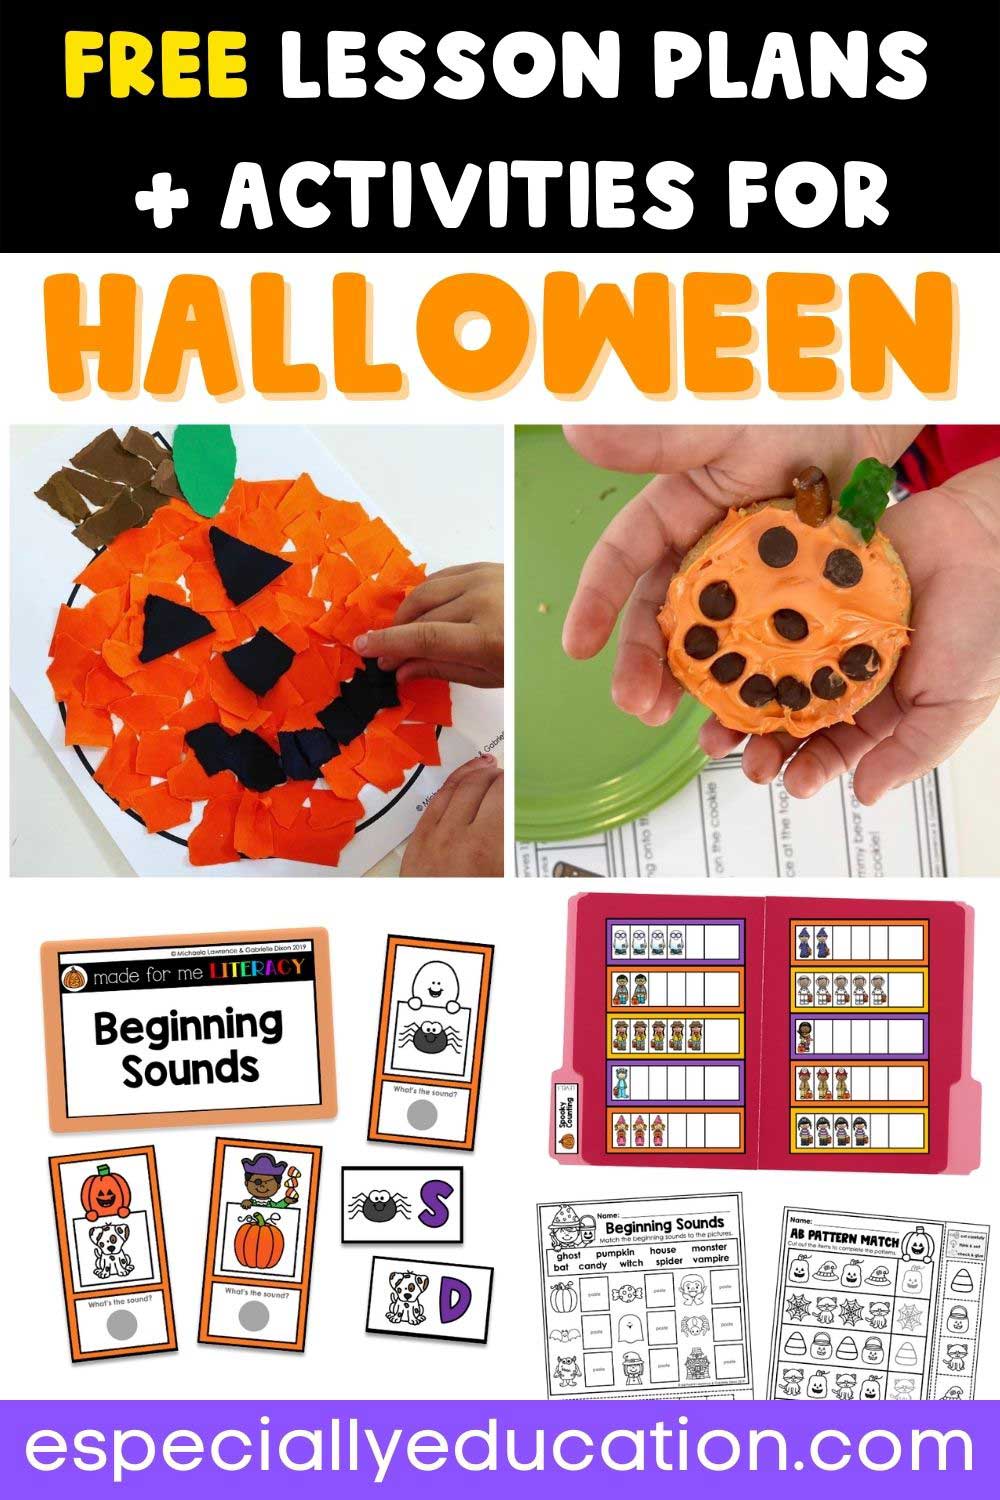 A child gluing construction paper to a Jack-O-Lantern collage, a child holding a pumpkin frosted cookie,a begining sounds task box, and a Halloween themed file folder